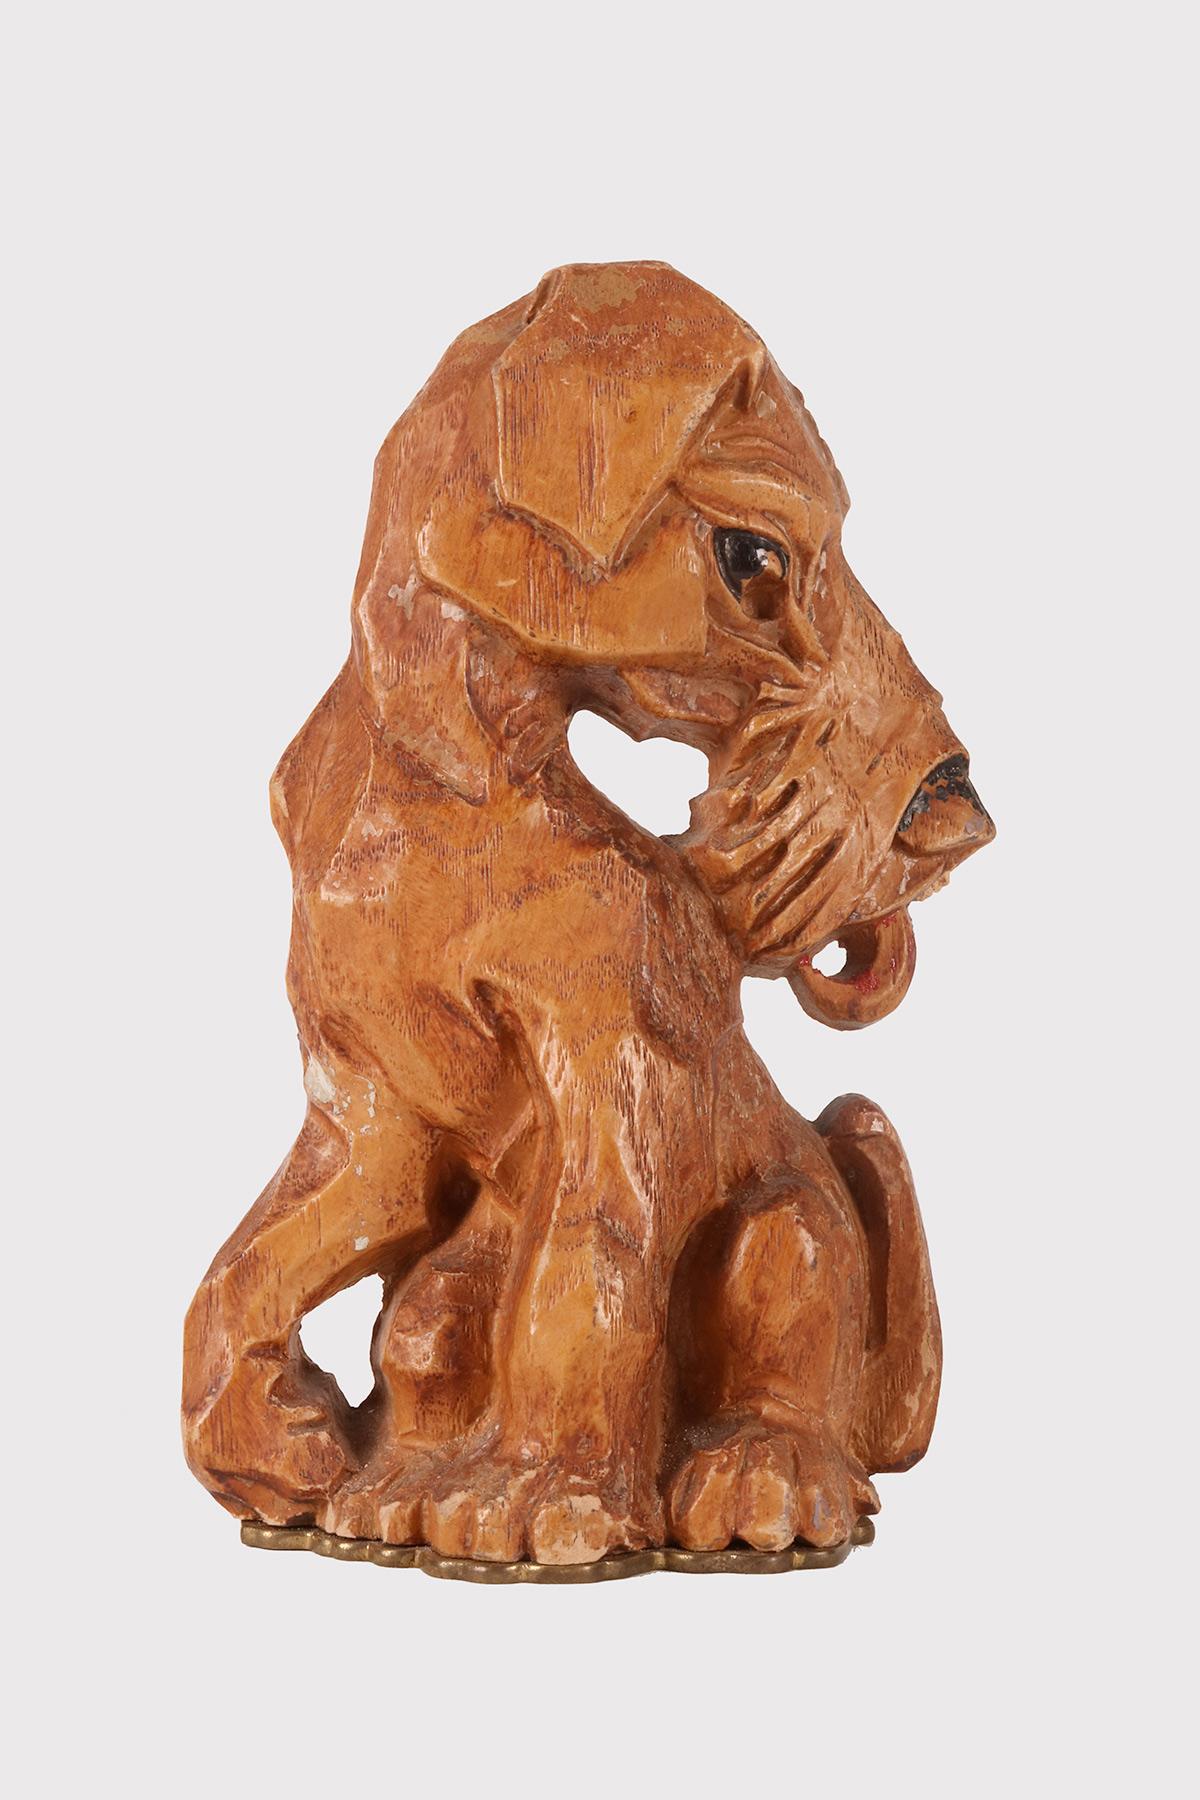 Carved hazel wood bookend, depicting a stylized Fox terrier dog, in a sitting position. The eyes, nose and tongue have streaks of colour, the base is made of brass. England, circa 1950.